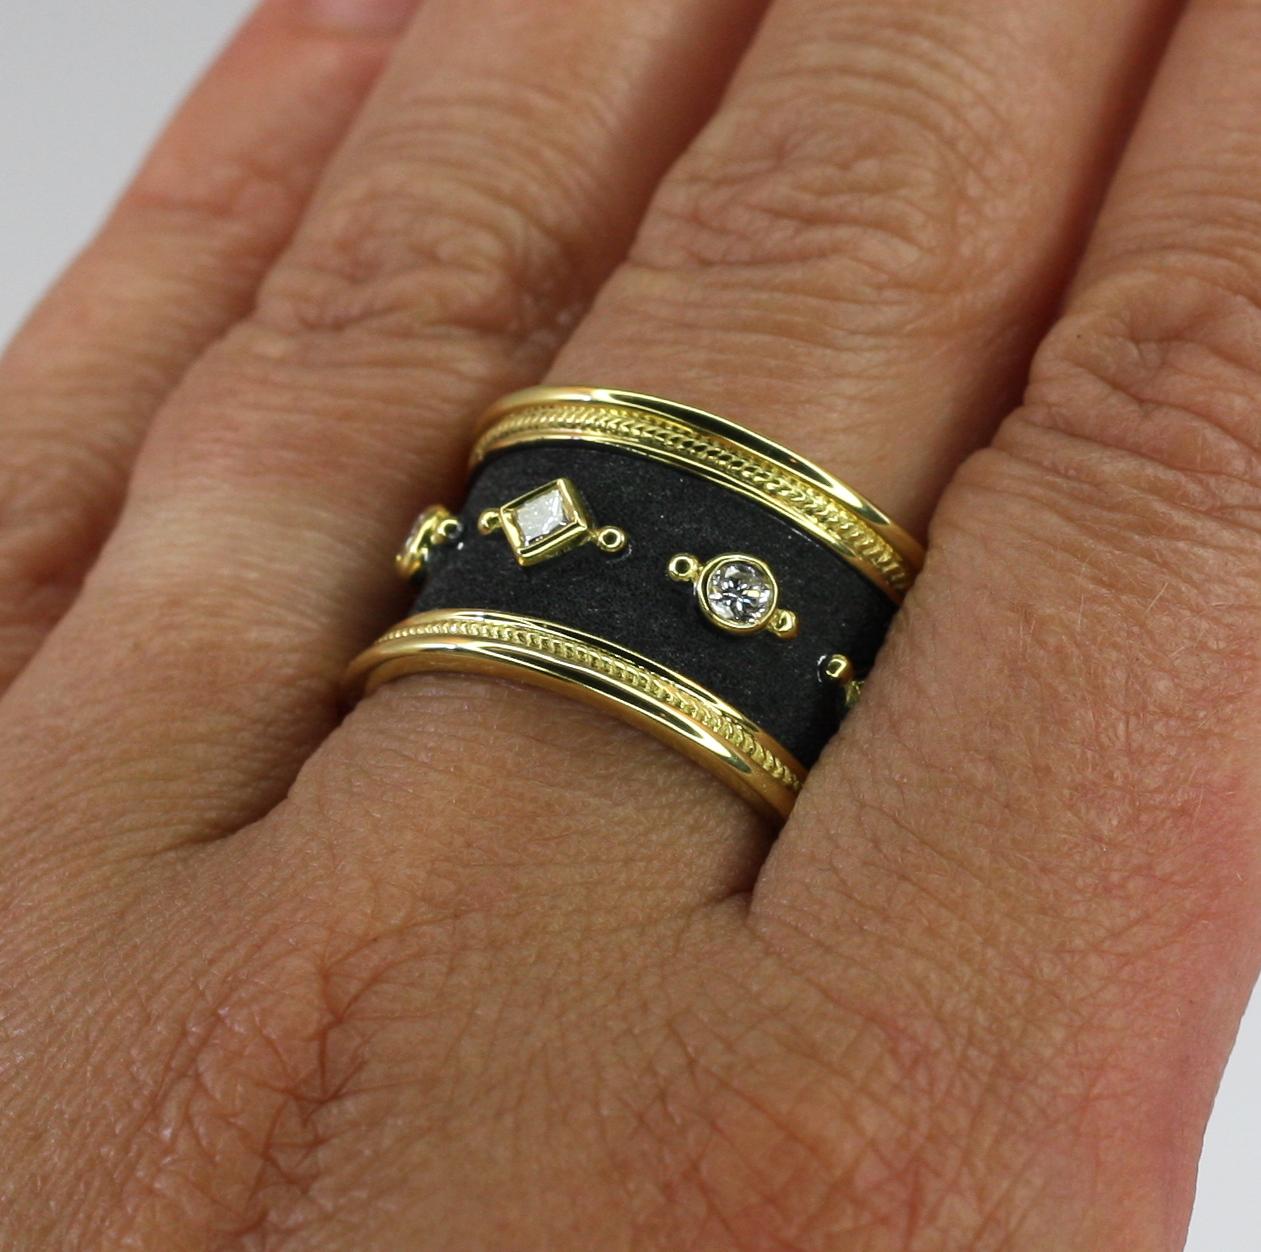 S.Georgios designer eternity band ring is all handmade from solid 18 Karat yellow gold and microscopically decorated all the way around with gold beads and wires. The unique velvet background is finished with black rhodium which created a perfect